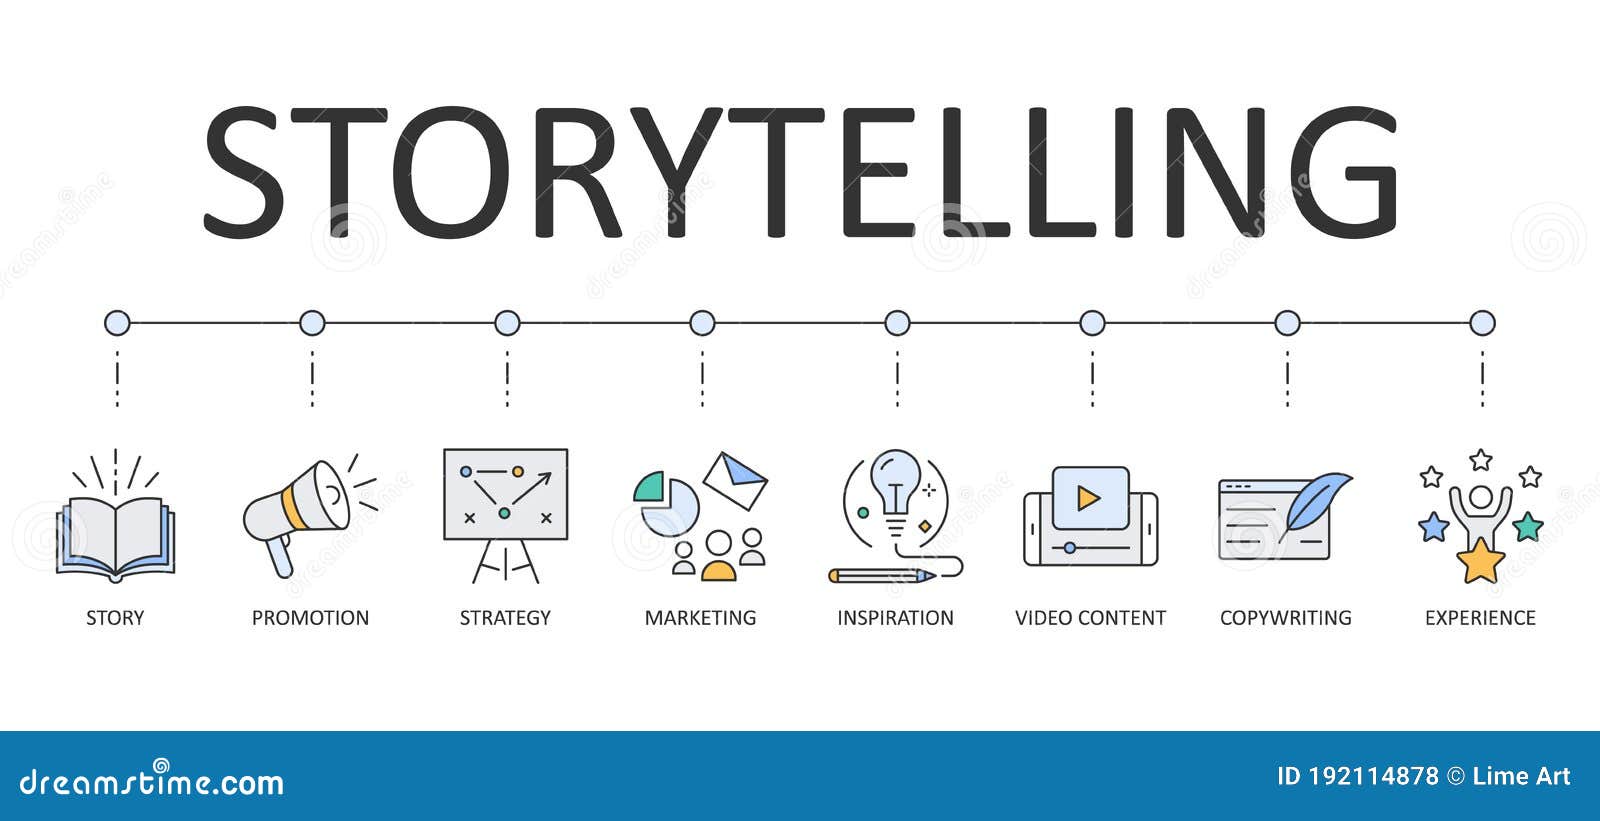  storytelling banner. editable stroke icons. story promotion strategy marketing. video content inspiration copywriting